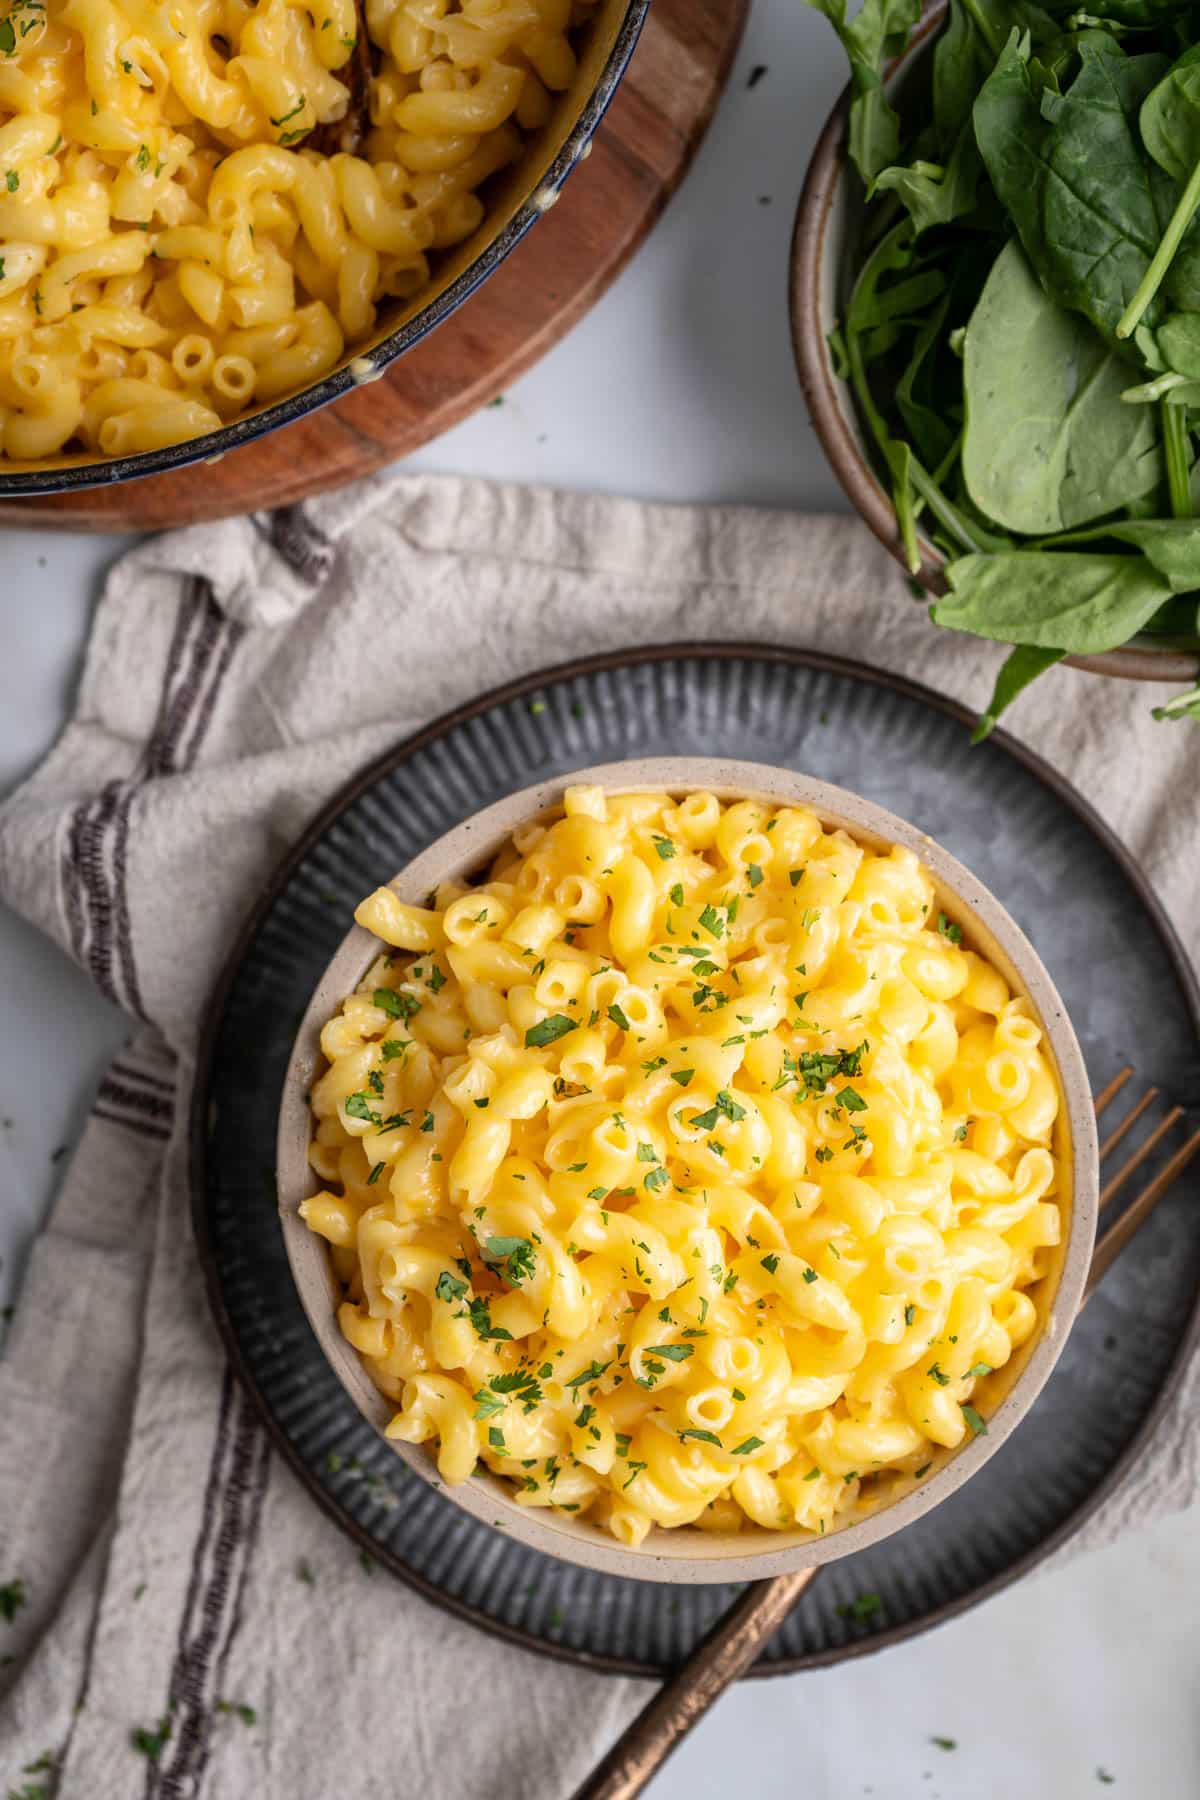 Gluten free macaroni and cheese in a bowl with fork.